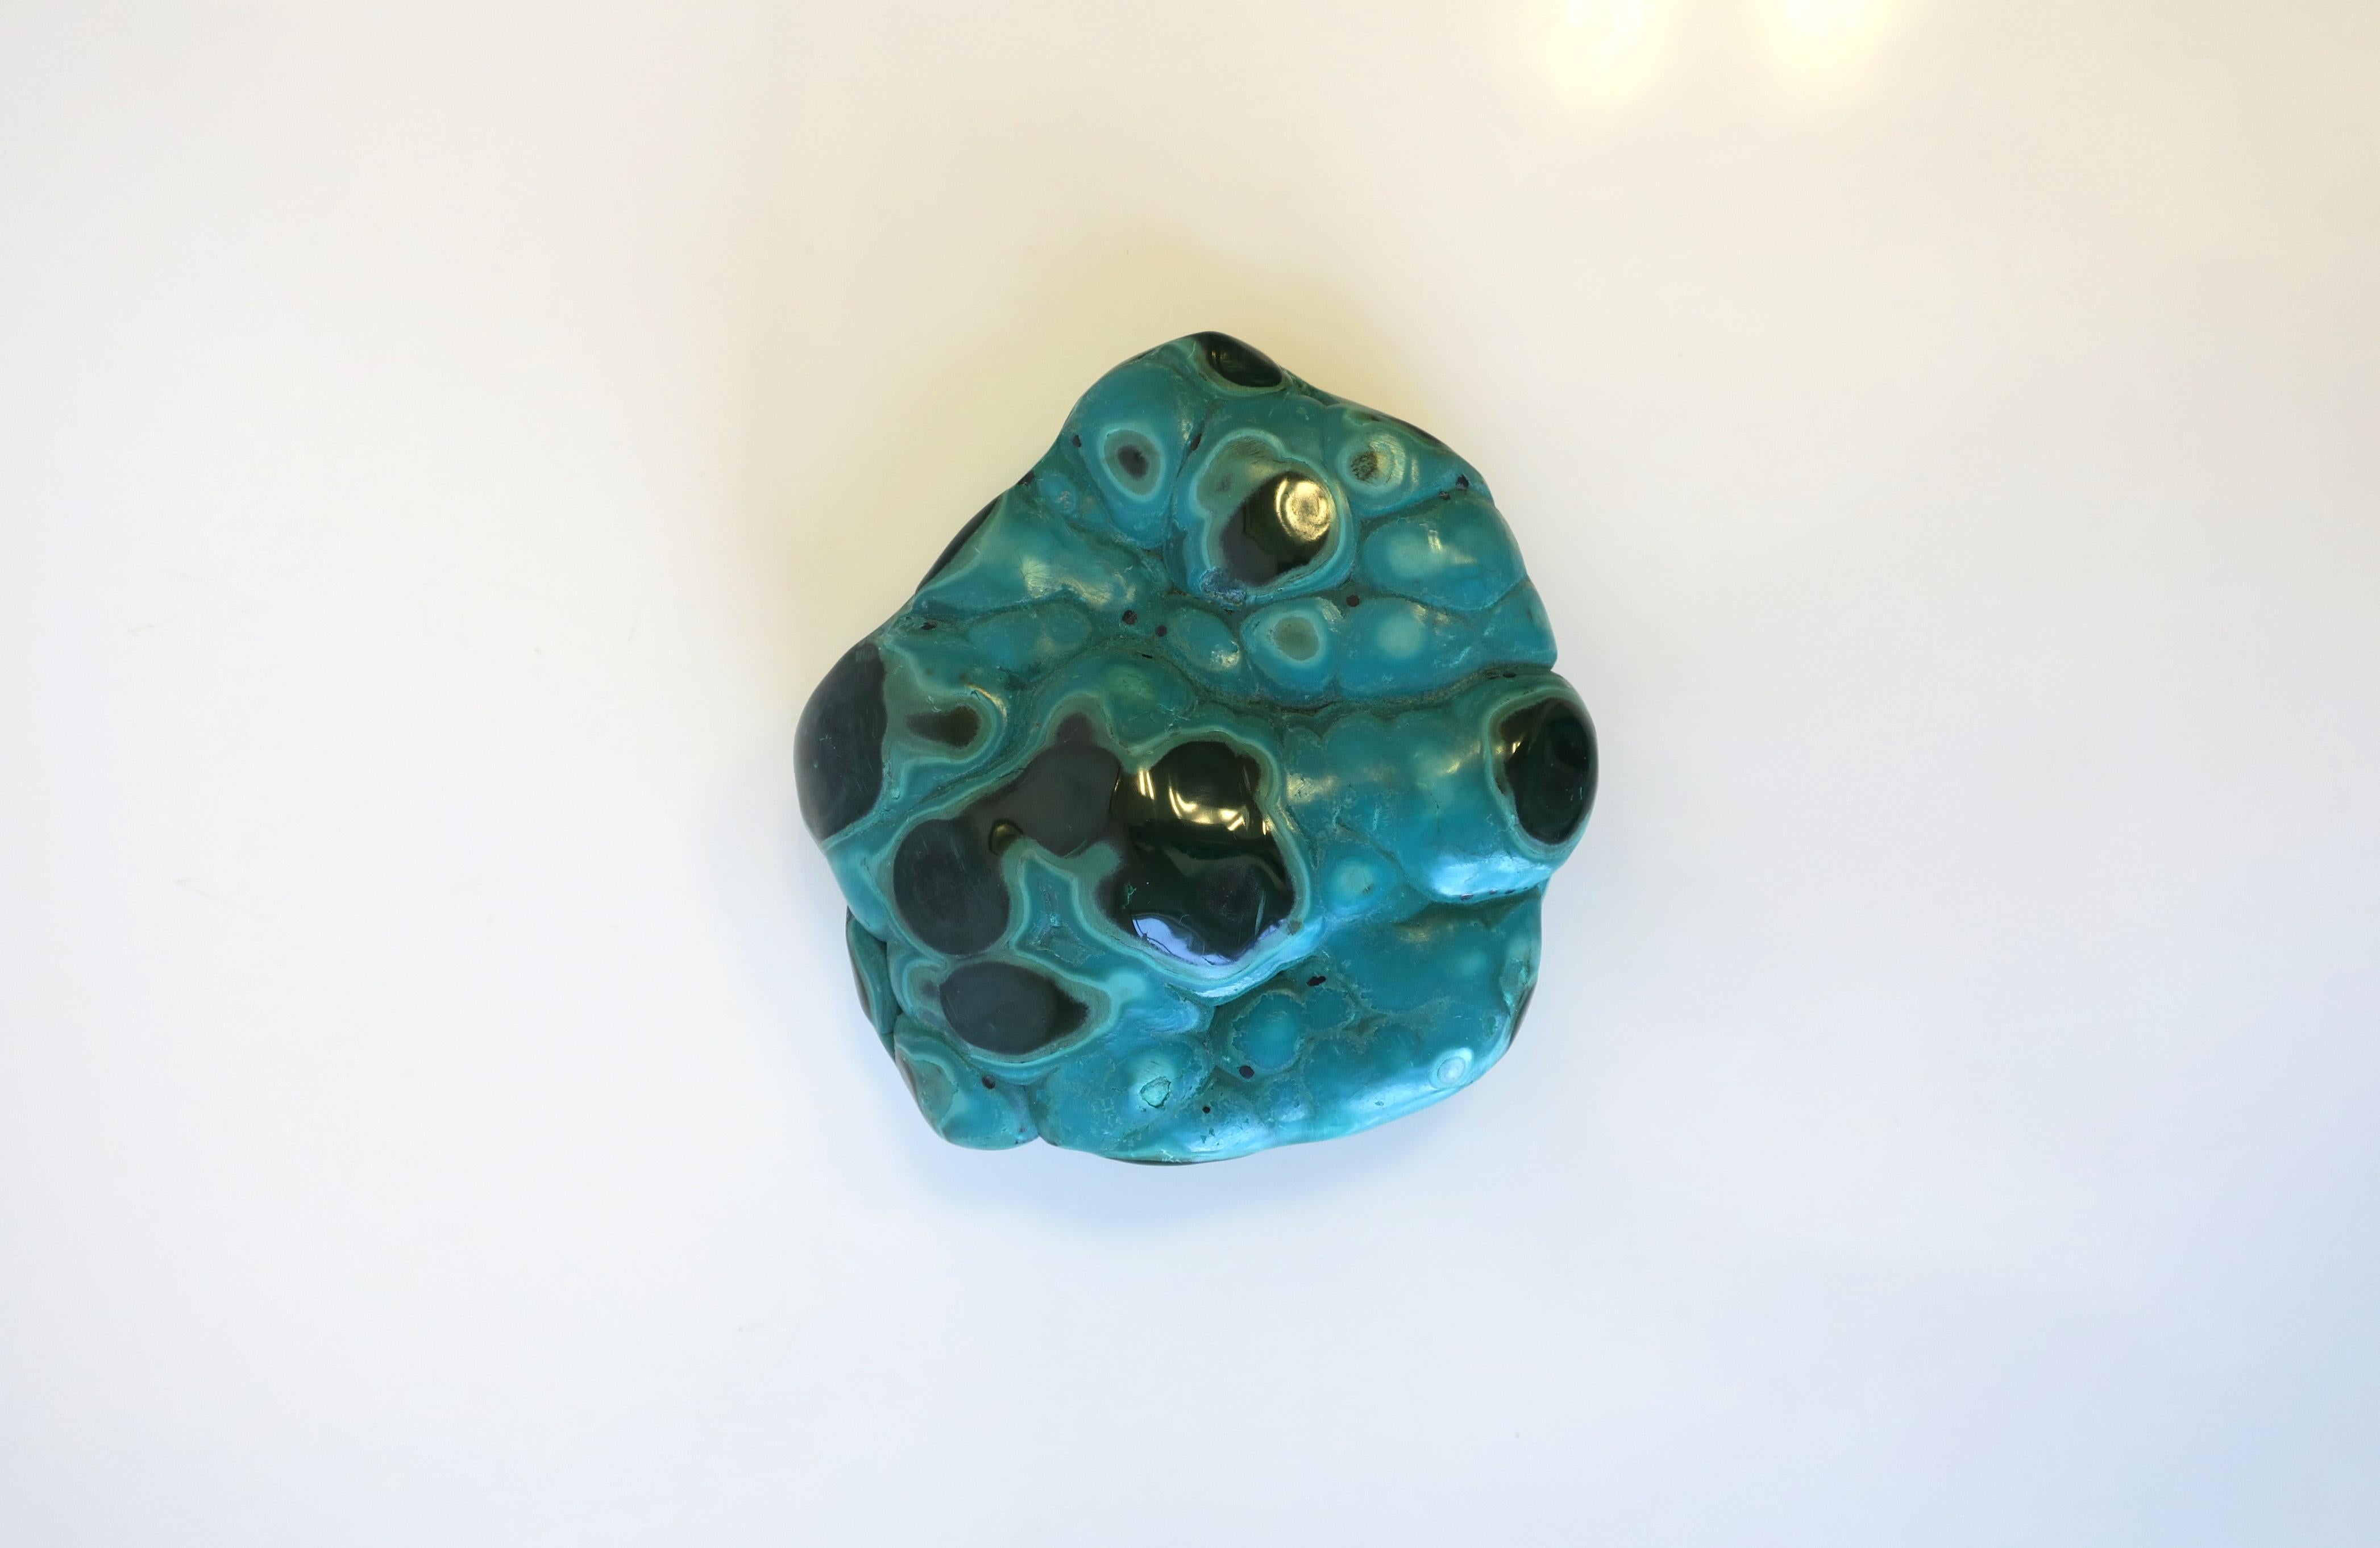 Organic Modern Green Malachite Paperweight or Decorative Object For Sale